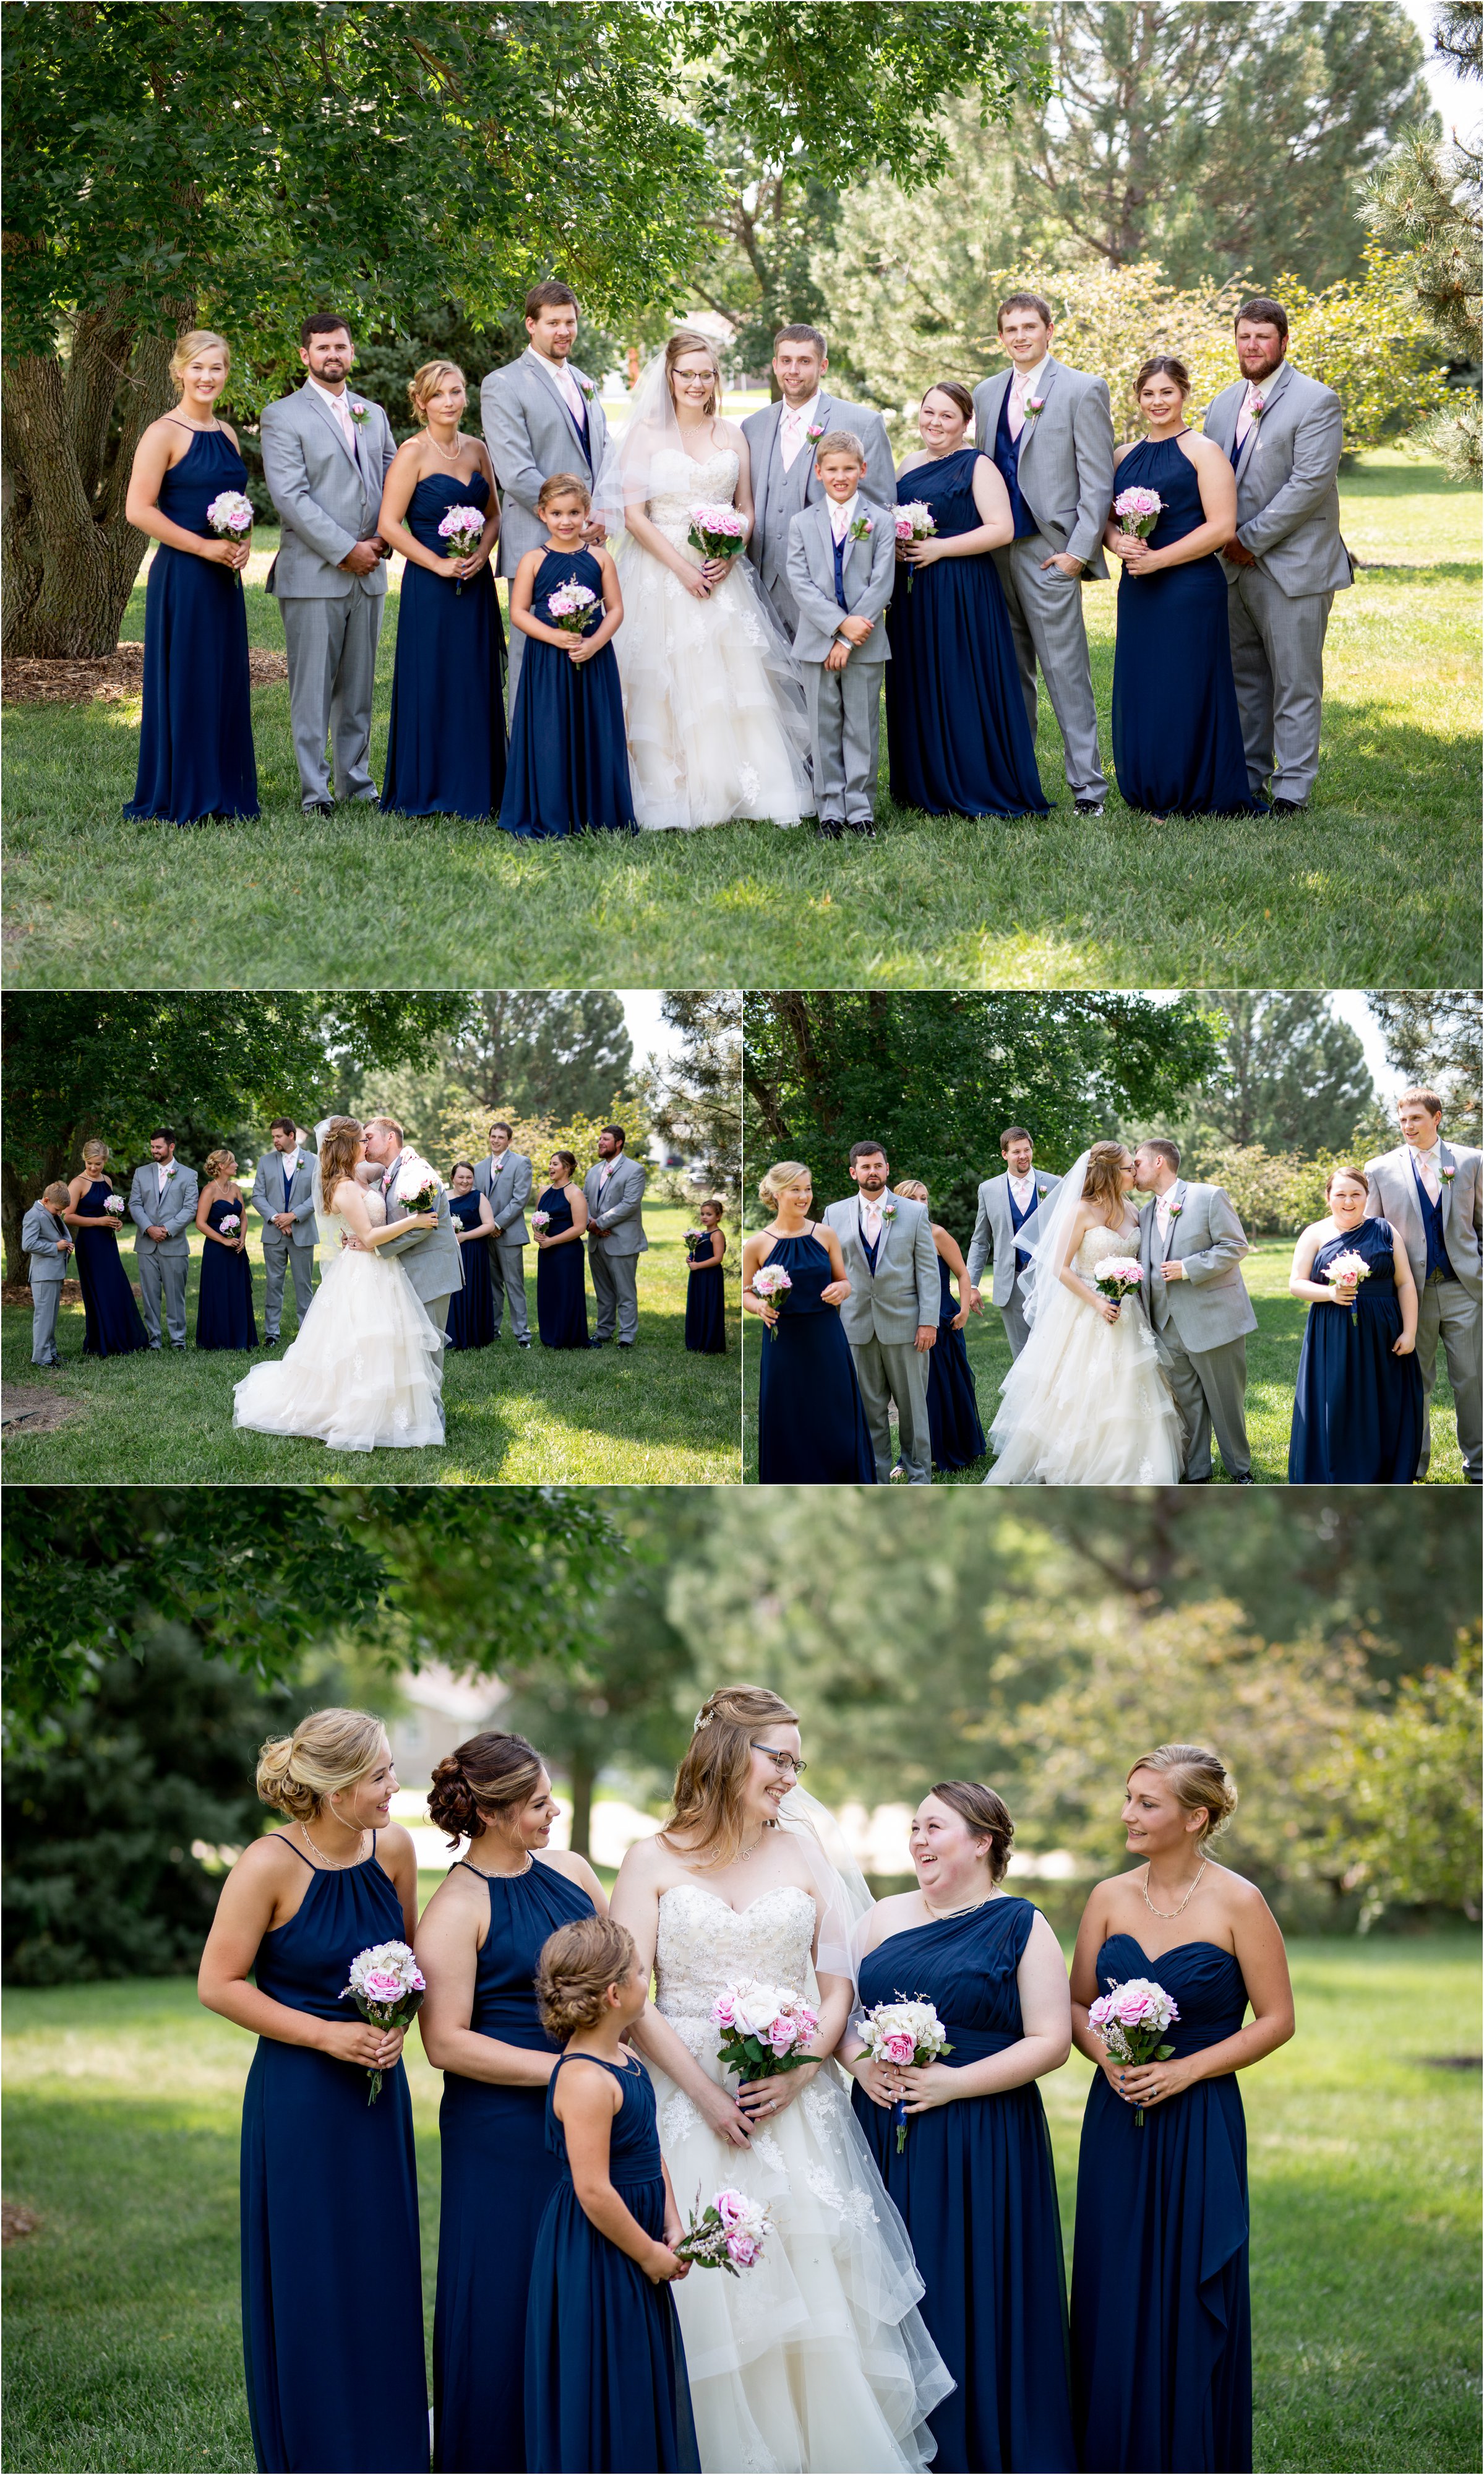 bride and groom pose with her bridesmaids in navy blue dresses with pink flowers and groomsen in gray before their wedding at holdrege trinity church